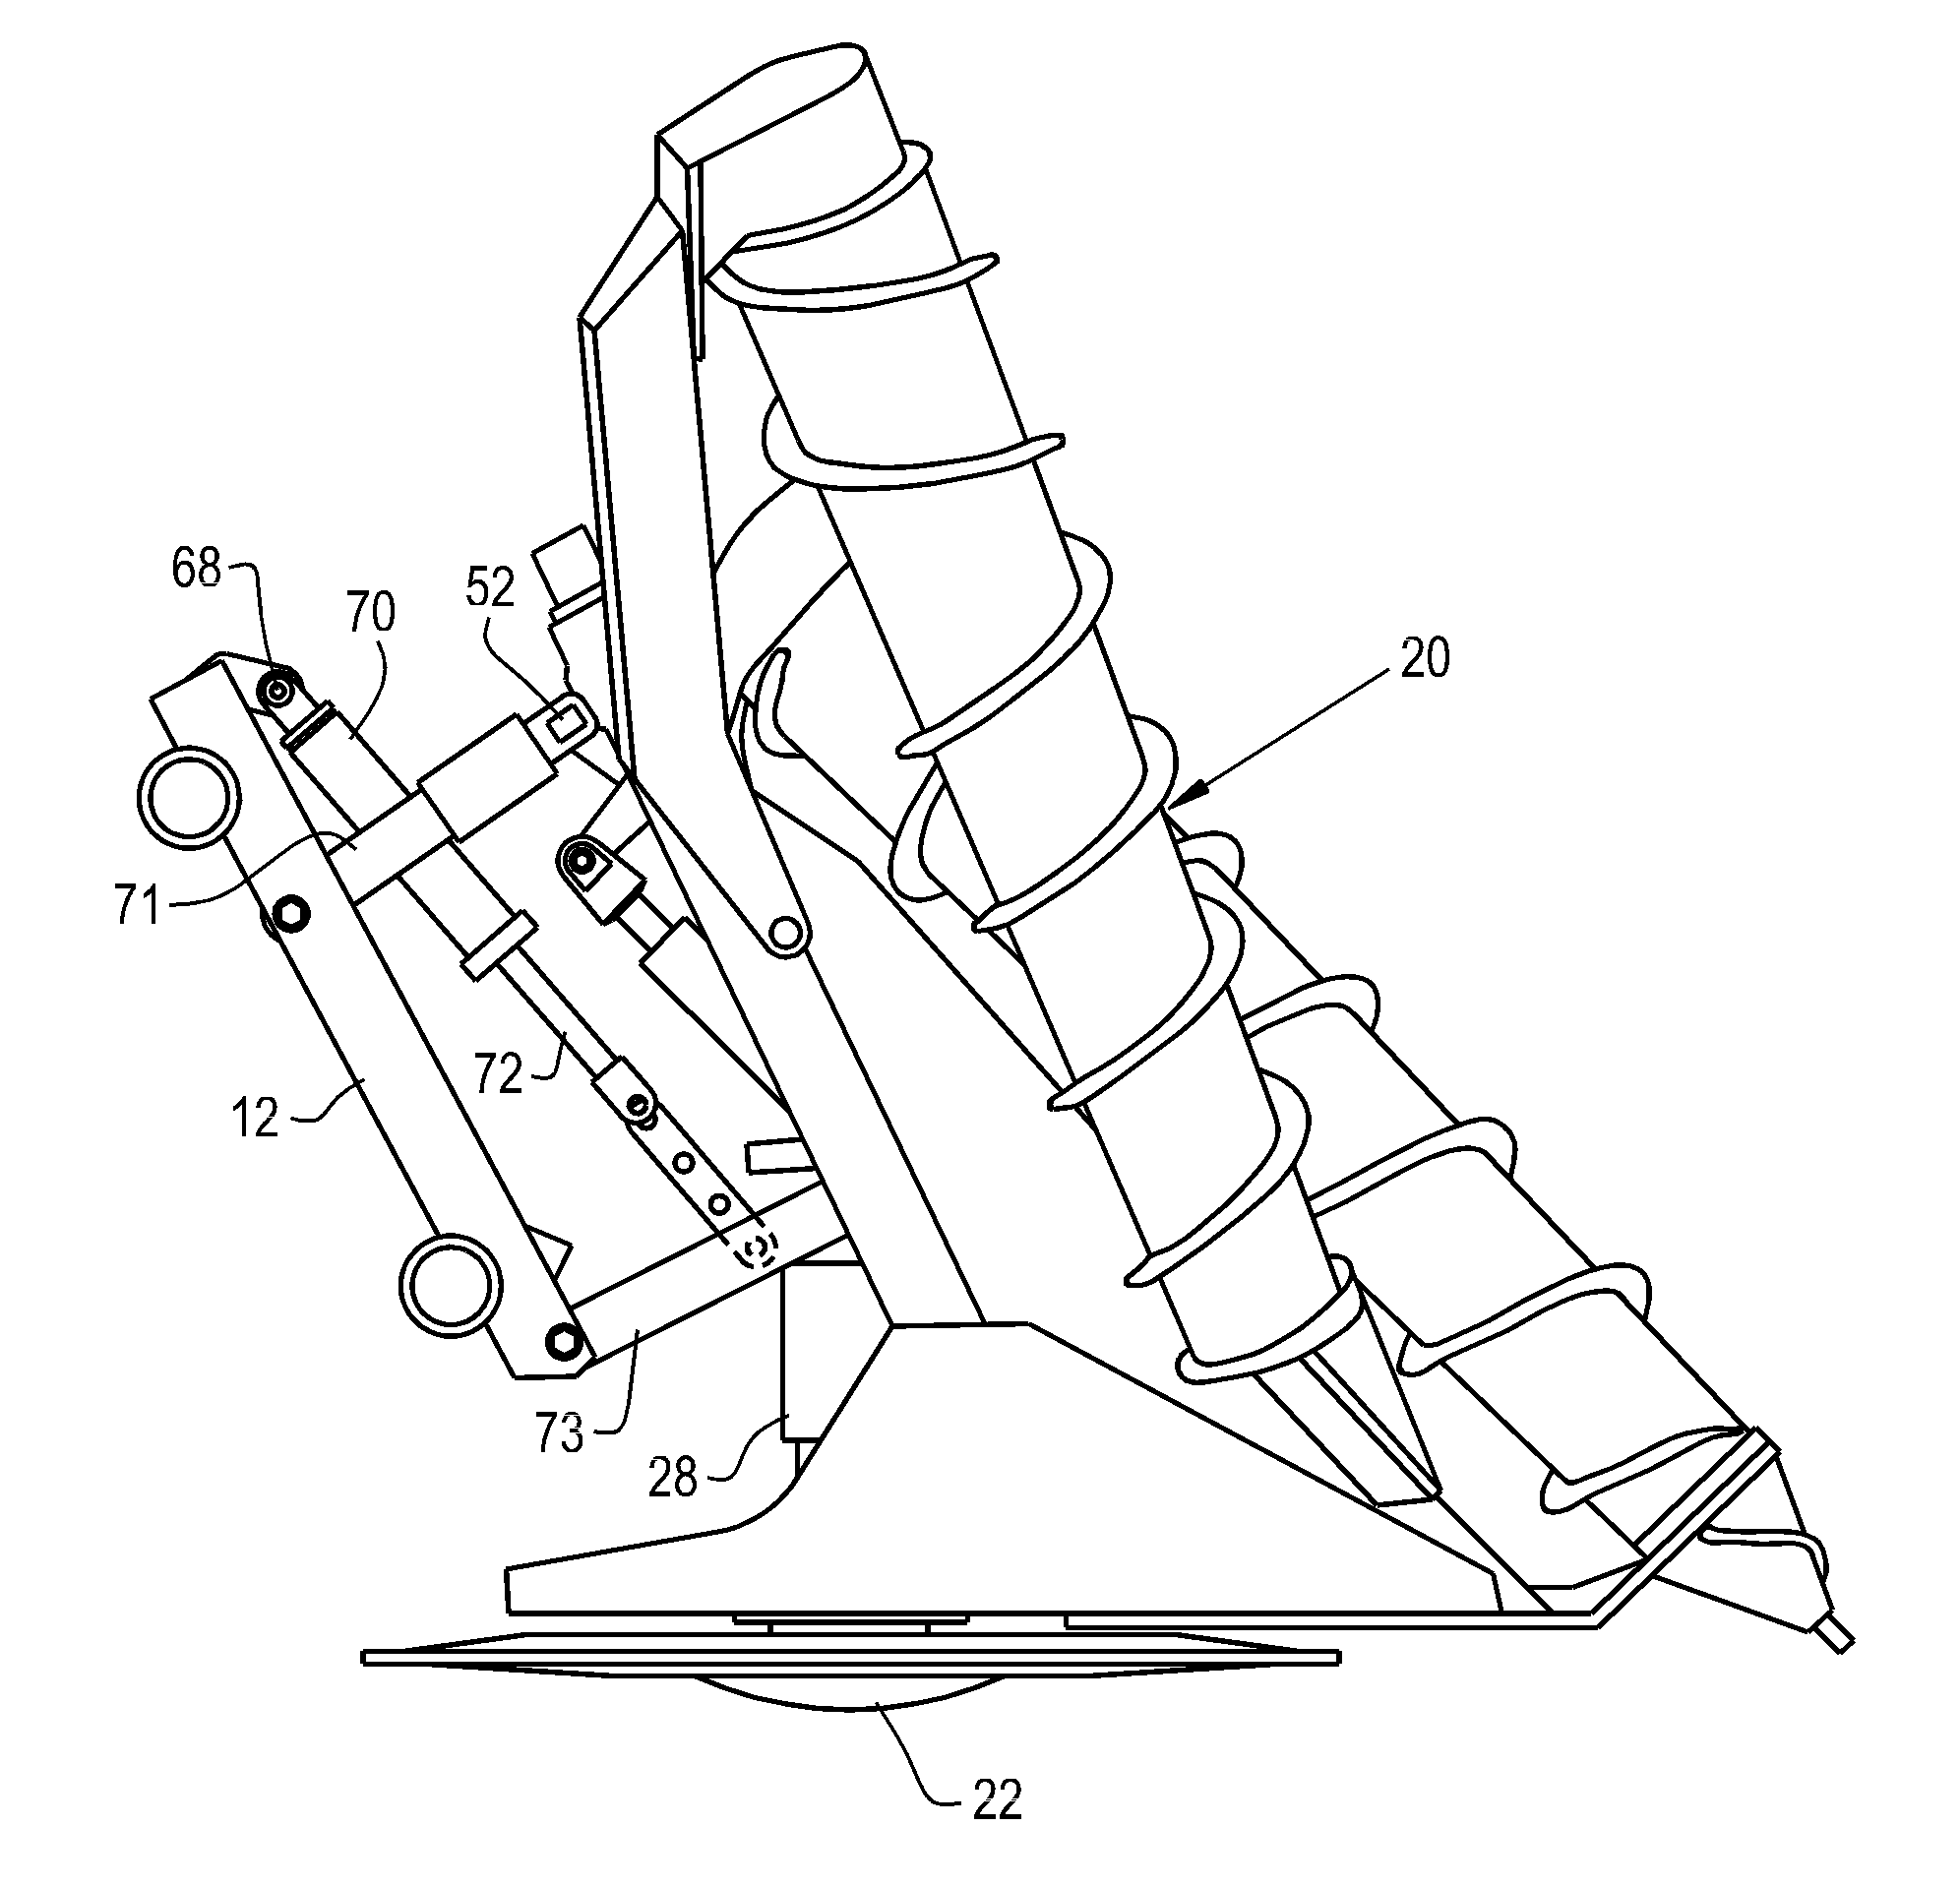 Method and Apparatus for Control of Base Cutter Height for Multiple Row Sugar Cane Harvesters